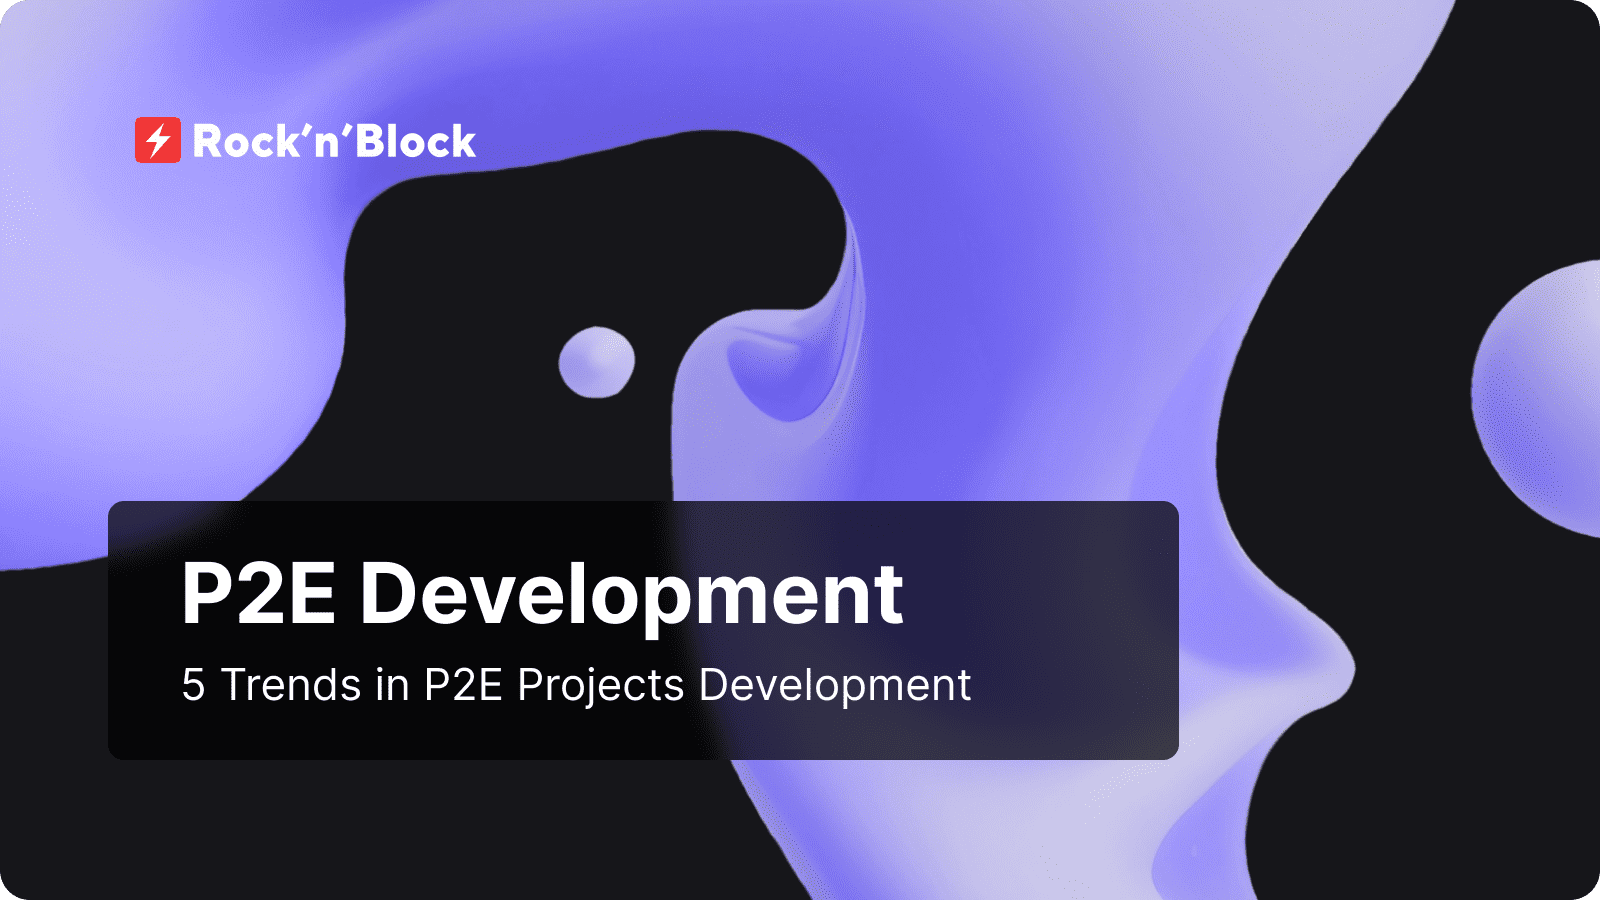 5 Trends in P2E Projects Development